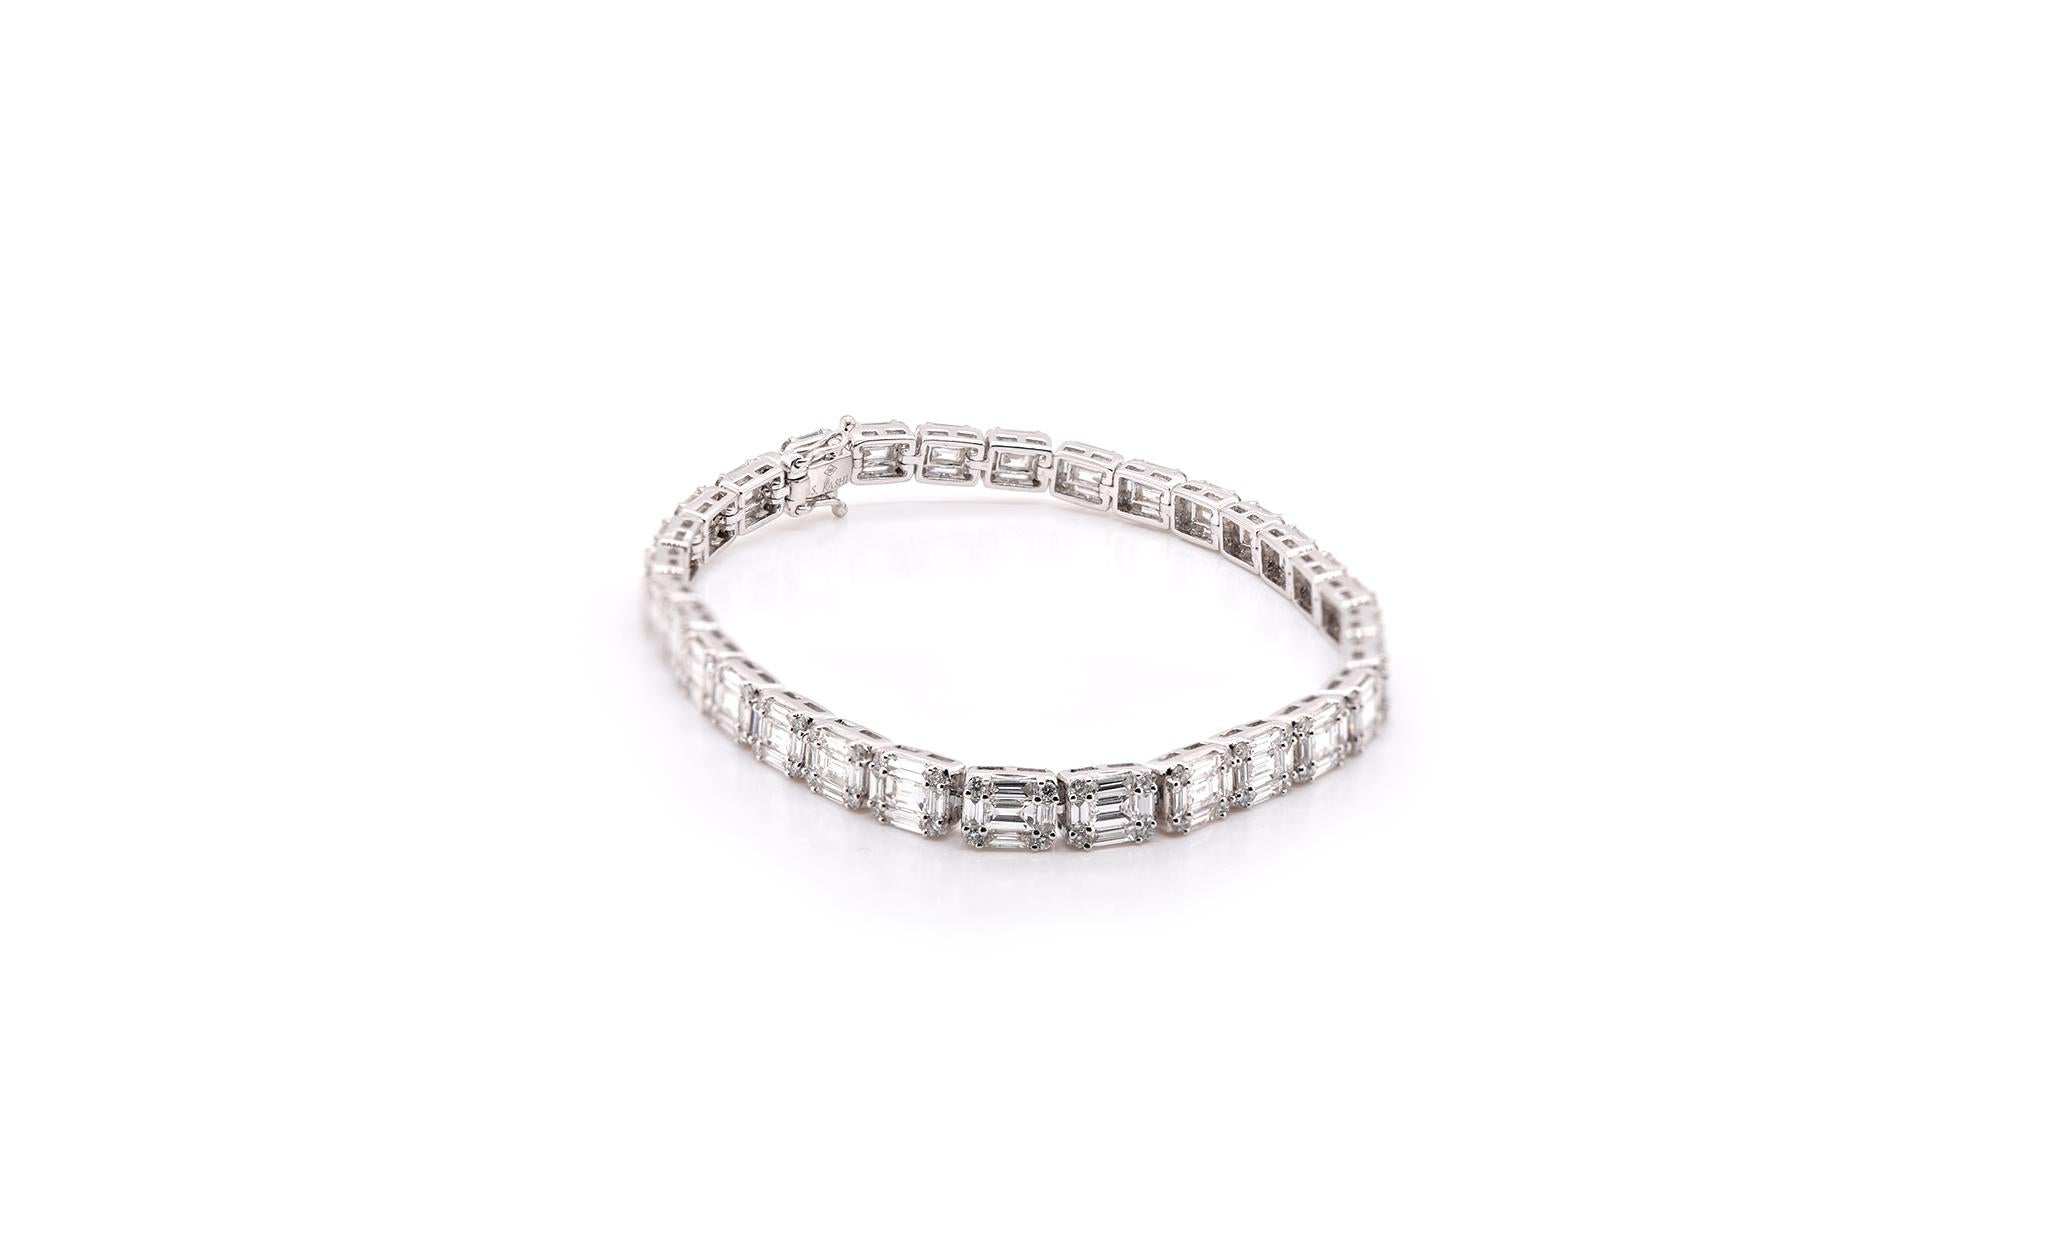 Designer: Custom Designed
Material: 18k white gold
Round Diamonds: 120 round brilliant cuts = .68cttw
Color: G
Clarity: VS
Baguette Diamonds: 150 baguette cuts = 4.92cttw
Color: G
Clarity: VS
Dimensions: the bracelet measures 7 inches in length and